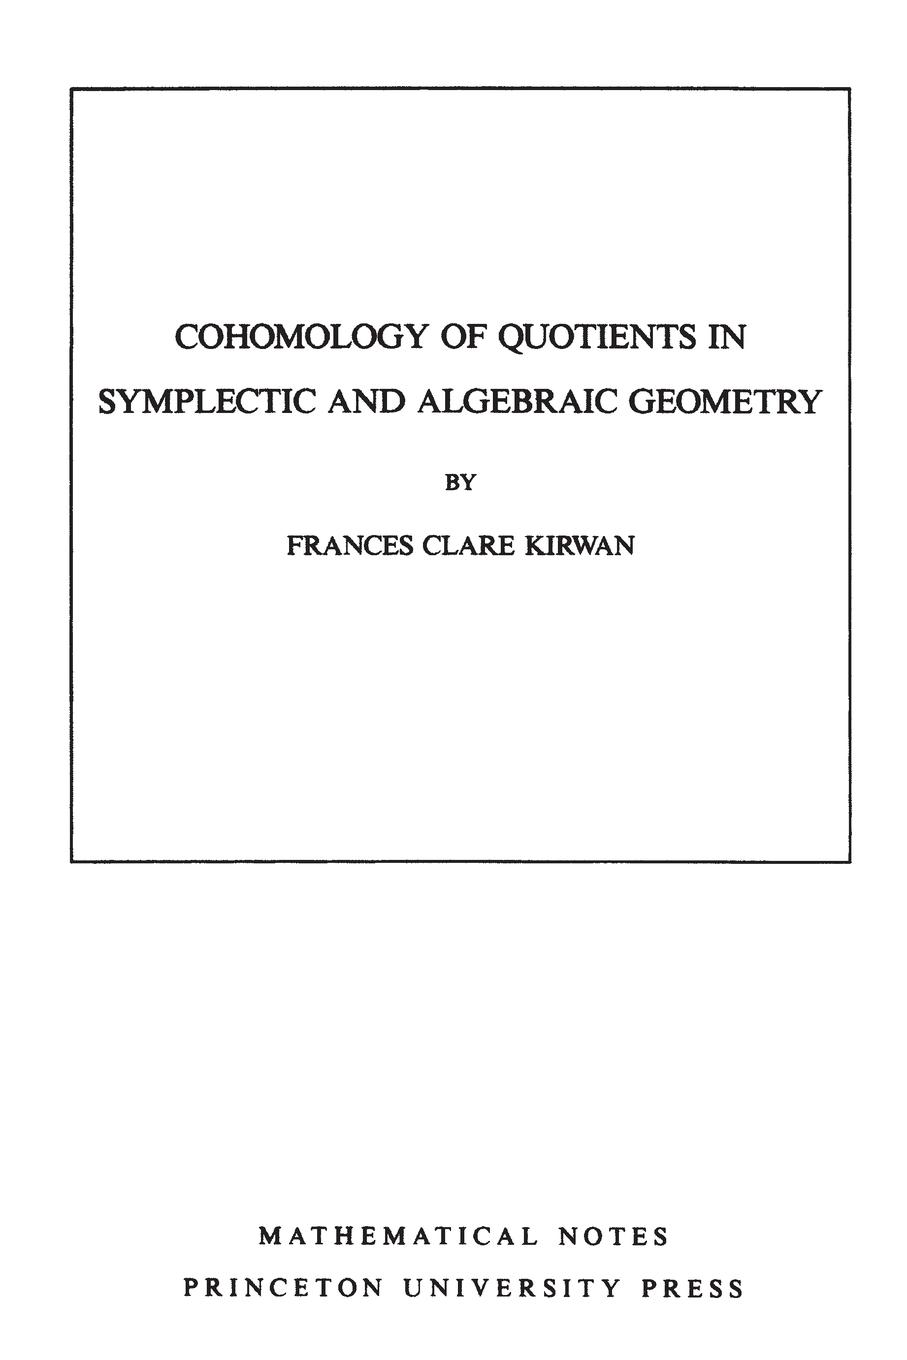 Cohomology of Quotients in Symplectic and Algebraic Geometry. (MN-31), Volume 31 - Kirwan, Frances Clare